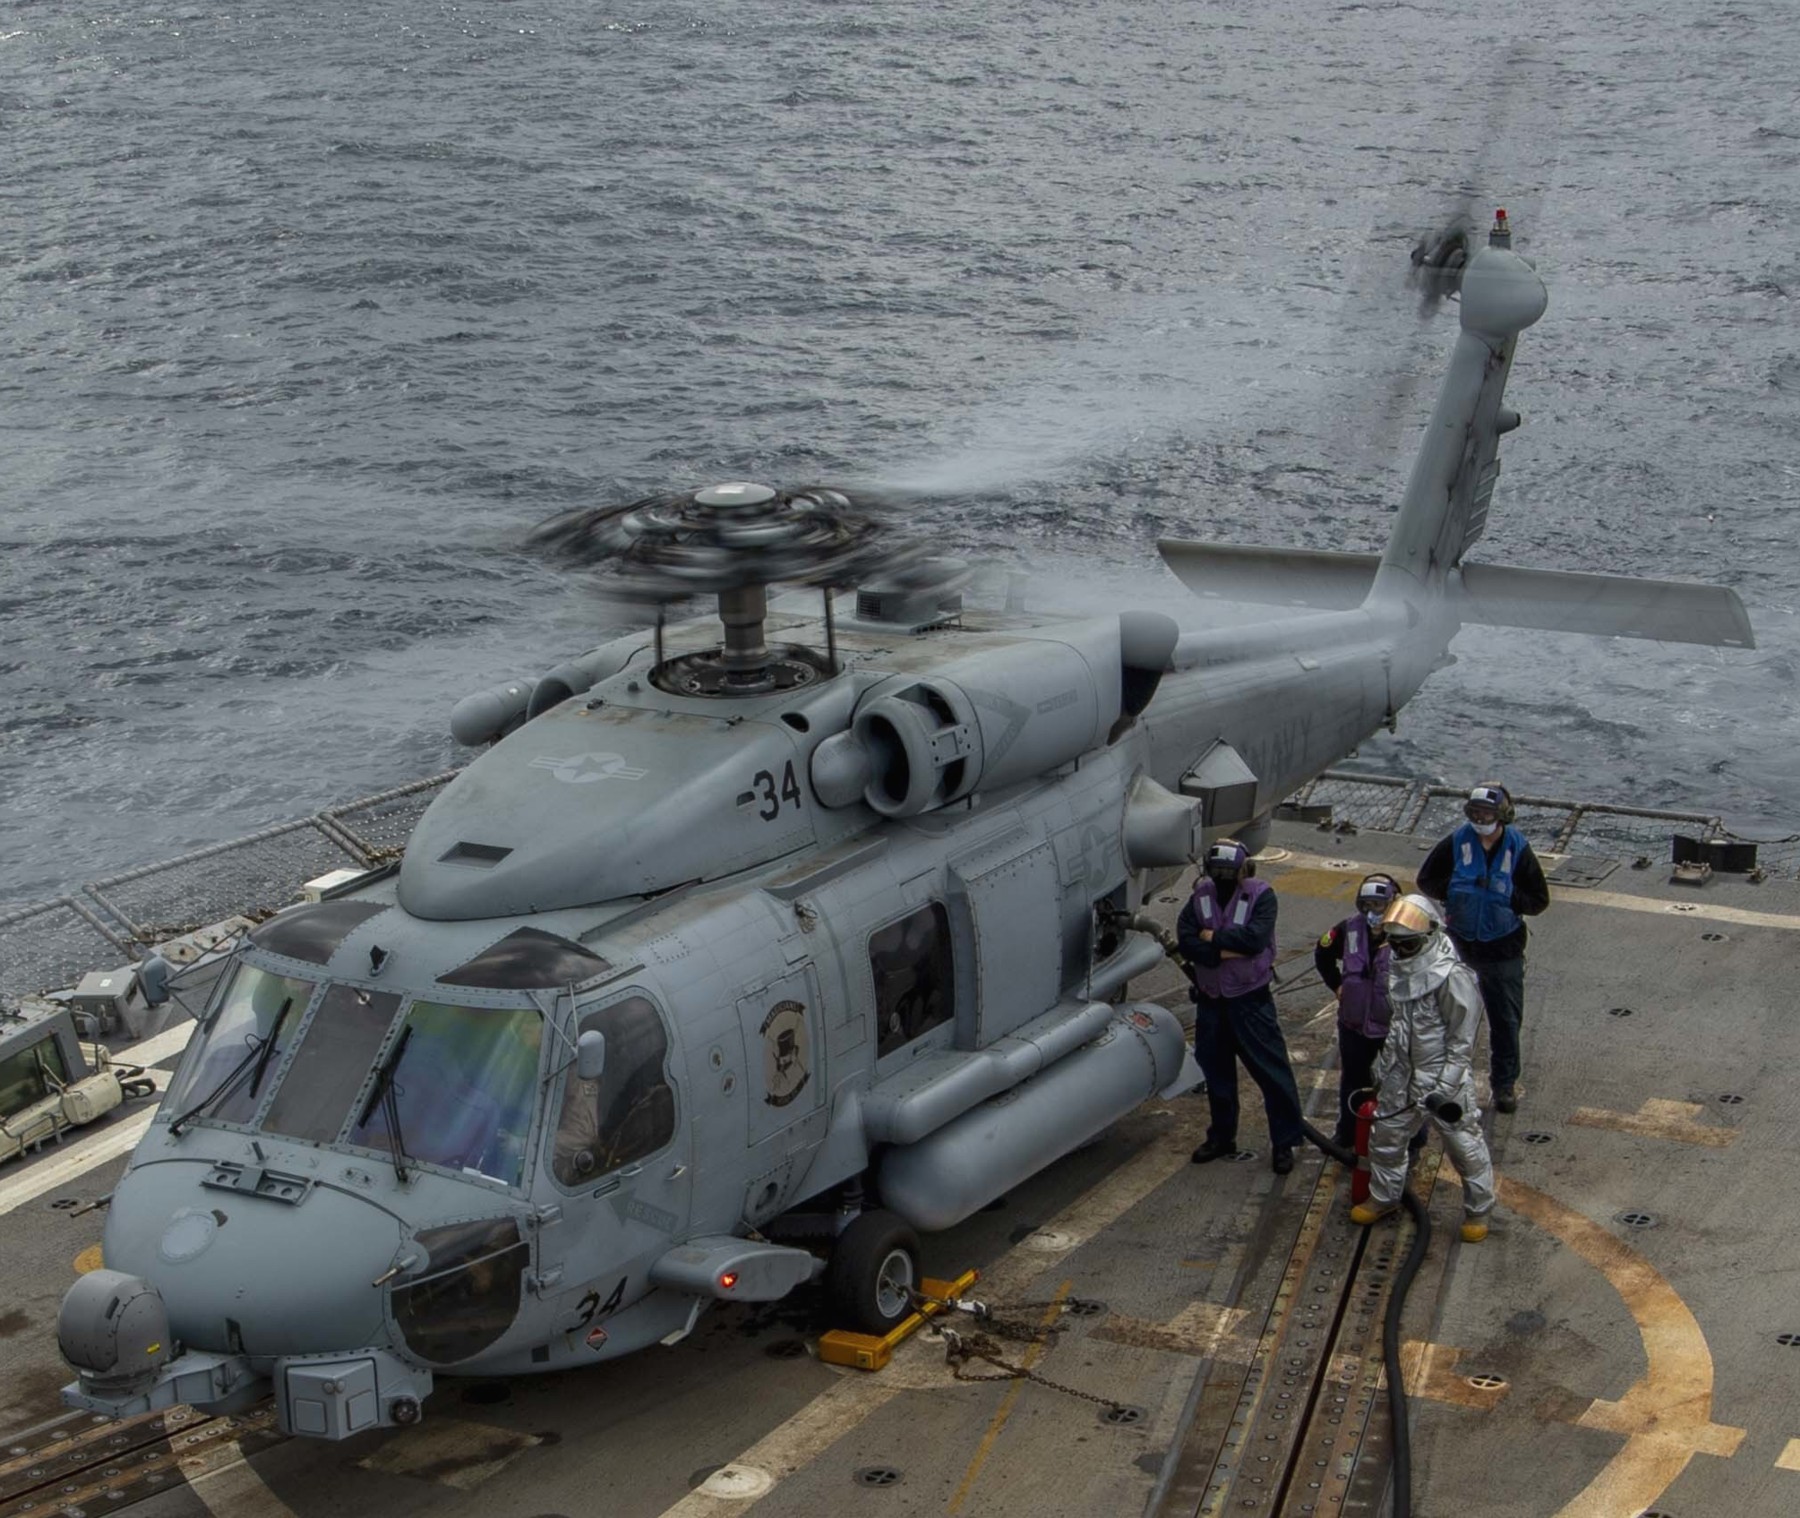 hsm-35 magicians helicopter maritime strike squadron us navy mh-60r seahawk 59